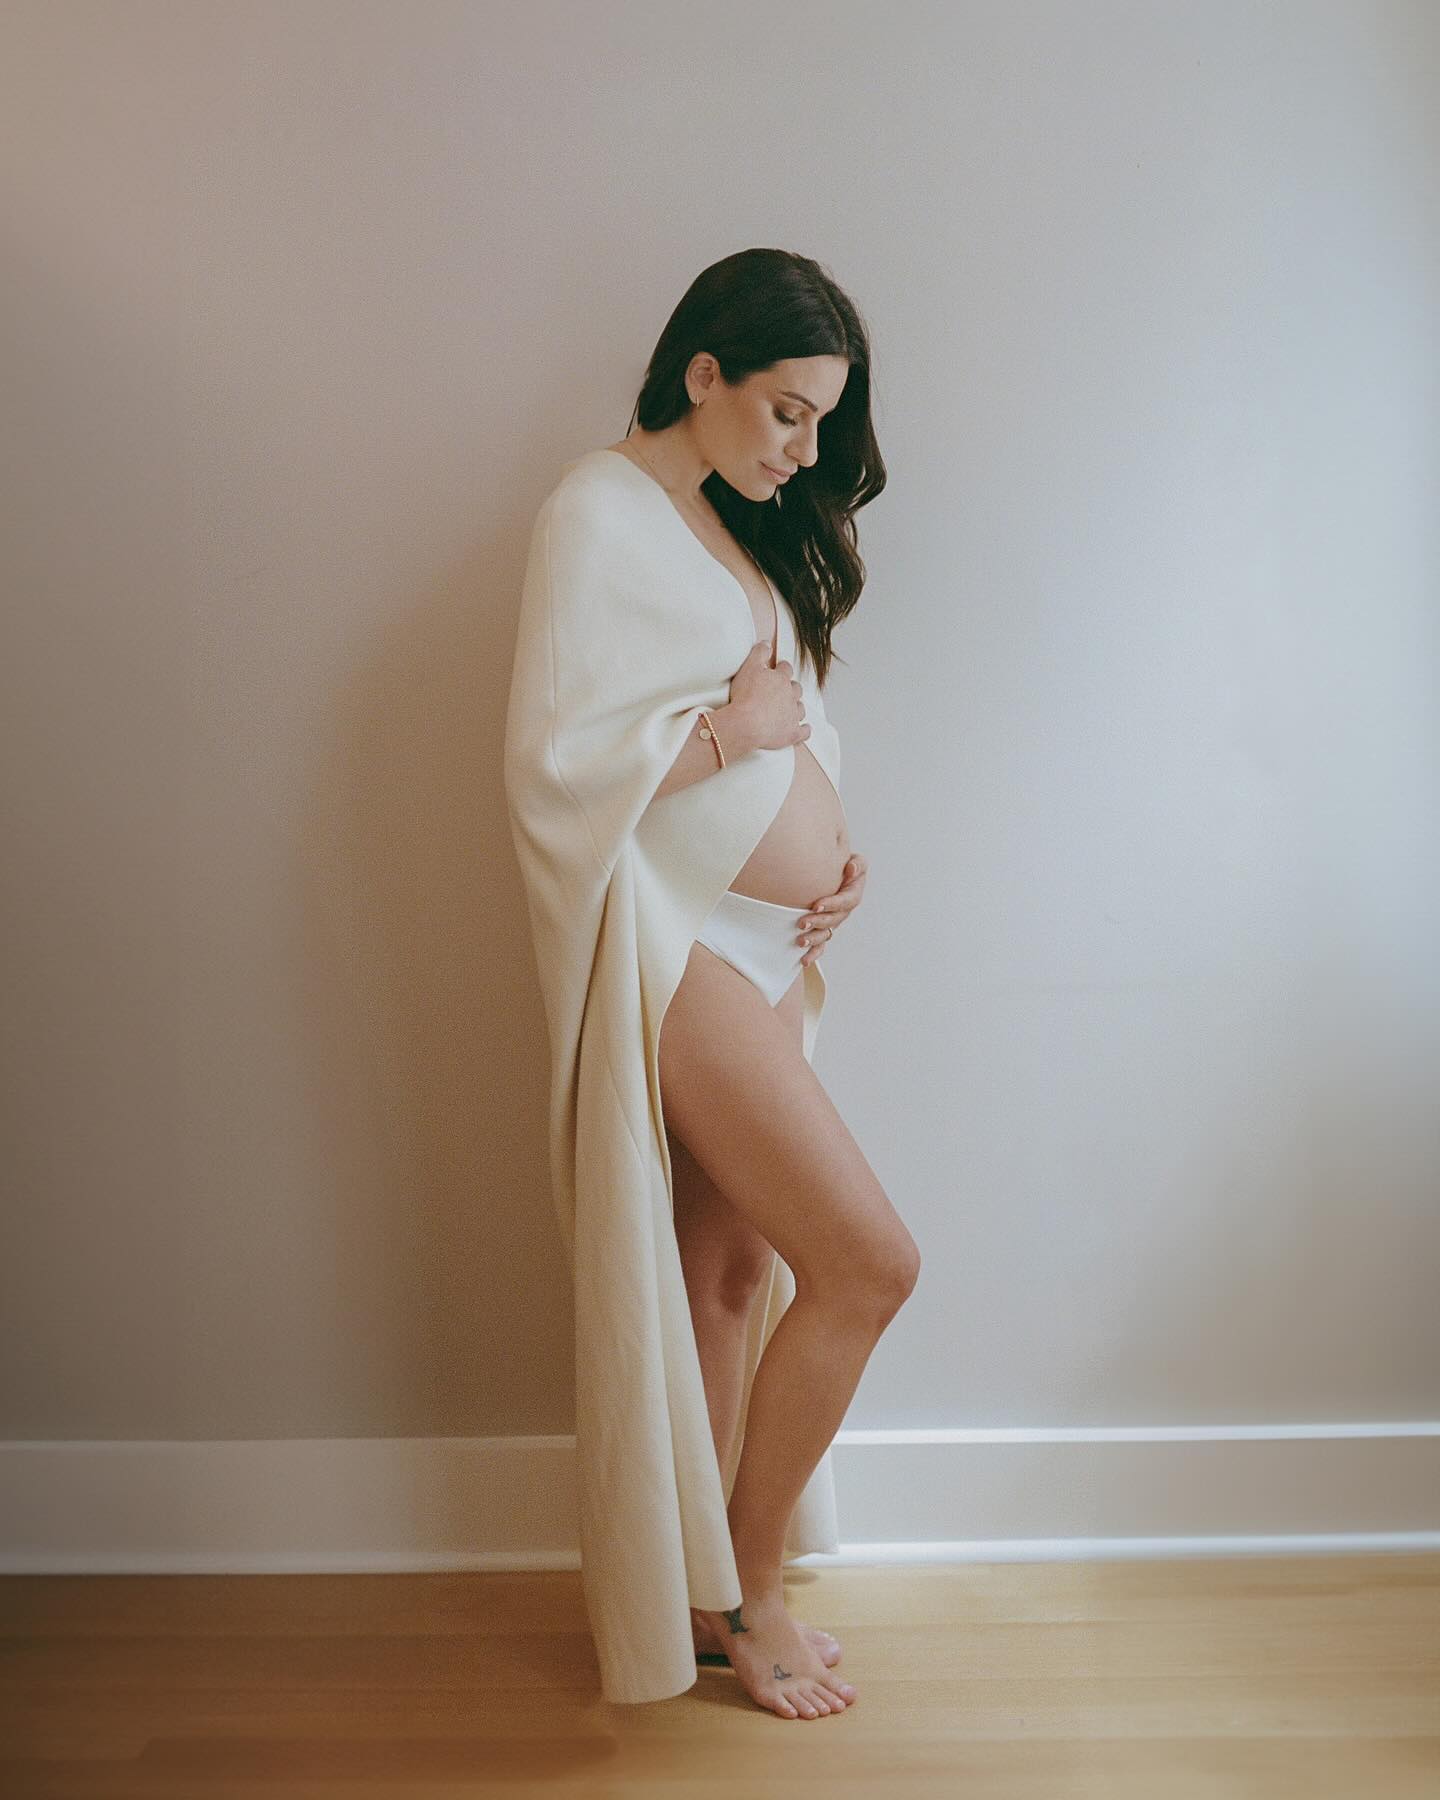 The intimate snapshots showed the Funny Girl star wearing a cream-colored shawl, that left her growing baby bump exposed, and matching underwear